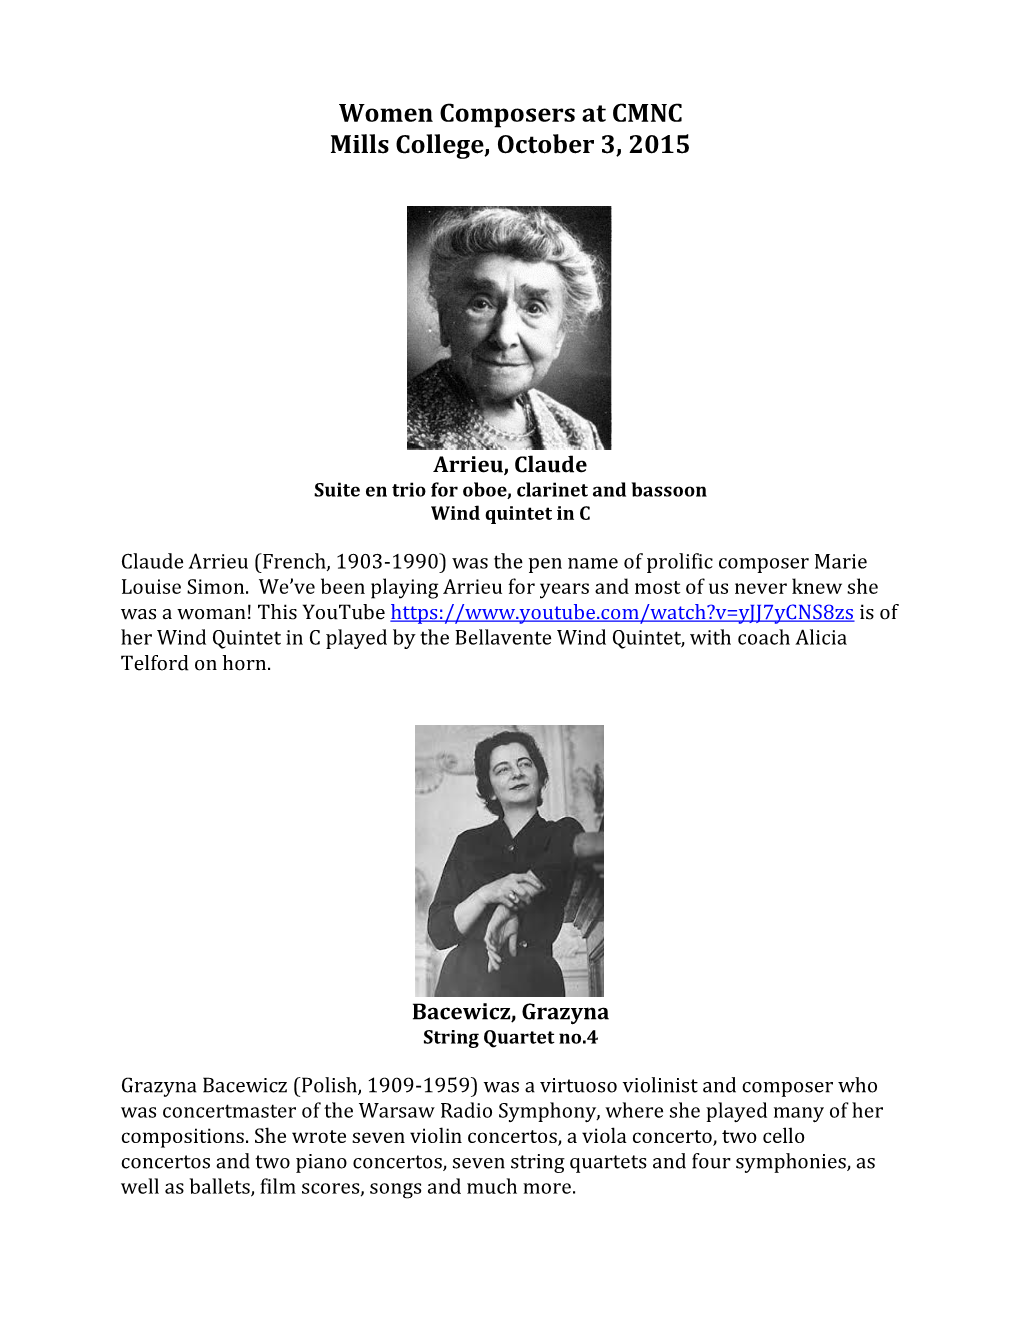 Women Composers at CMNC Mills College, October 3, 2015